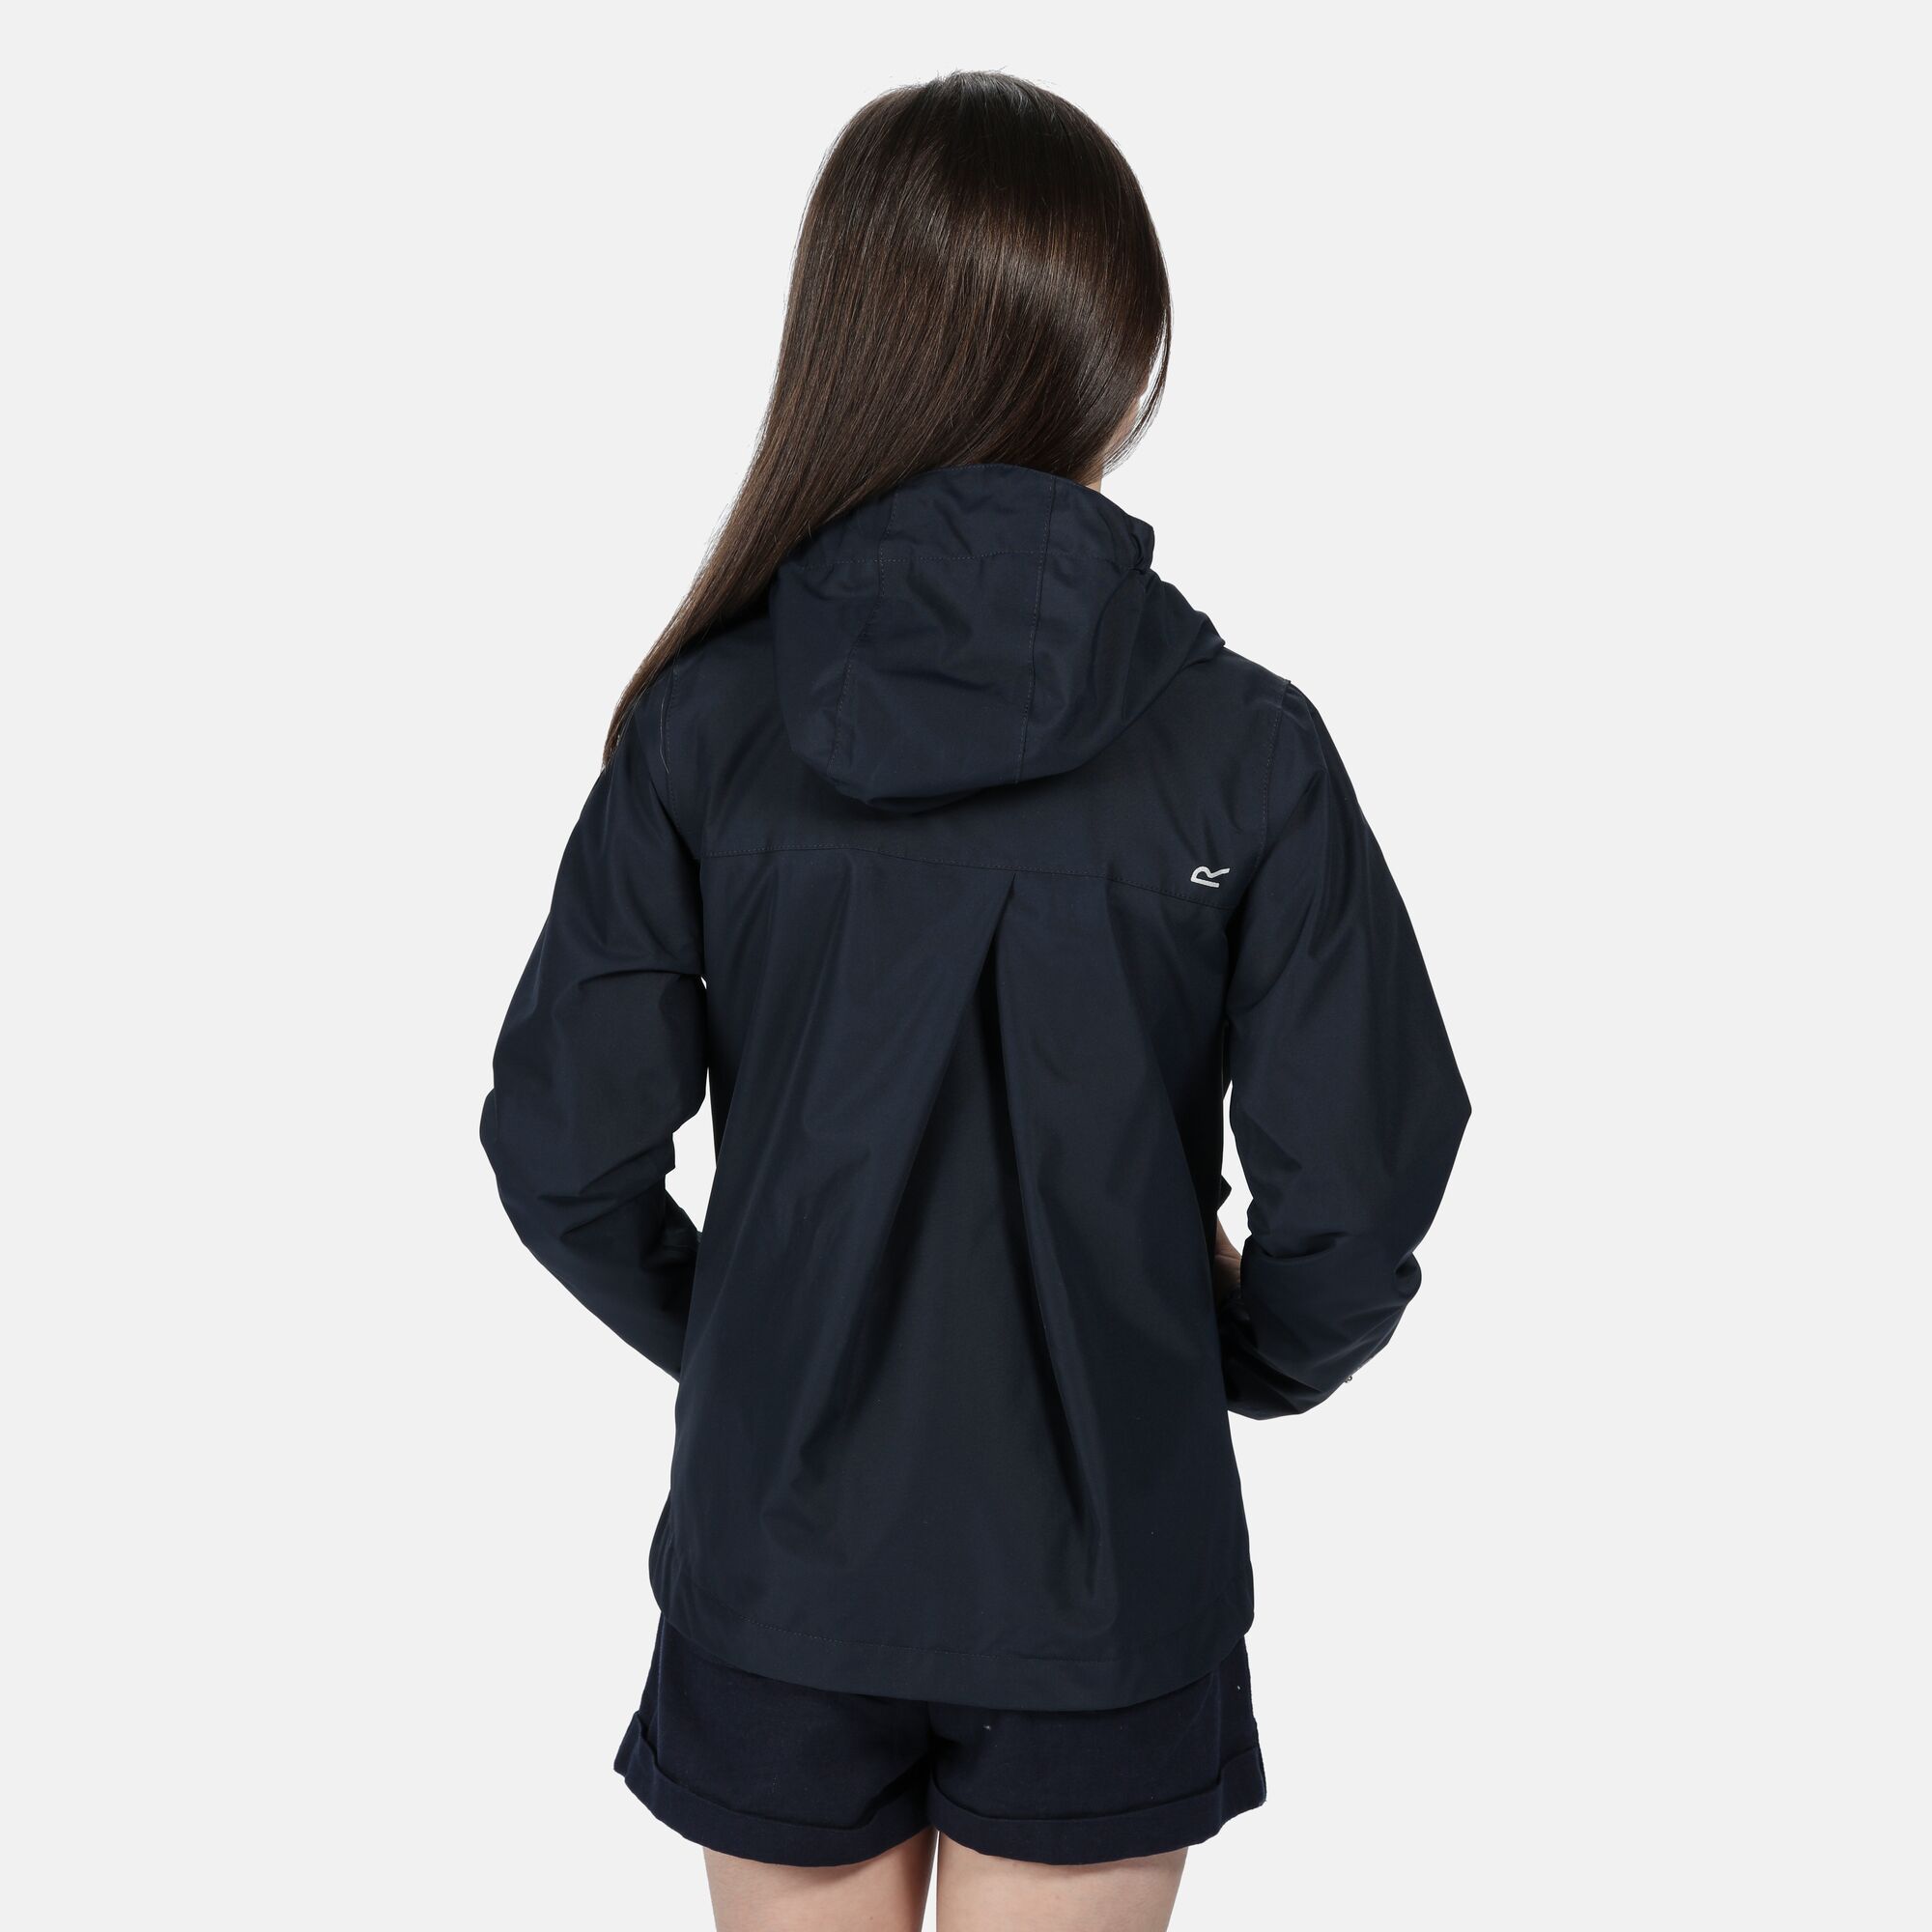 Material: 100% Polyester. Durable, water repellent summer rain mac with lining. Cut hip-length with a zip and stormflap fastening, spacious pockets. Grown on elasticated hood. Adjustable cuffs with snap fastening. Regatta logo badge on the left sleeve.